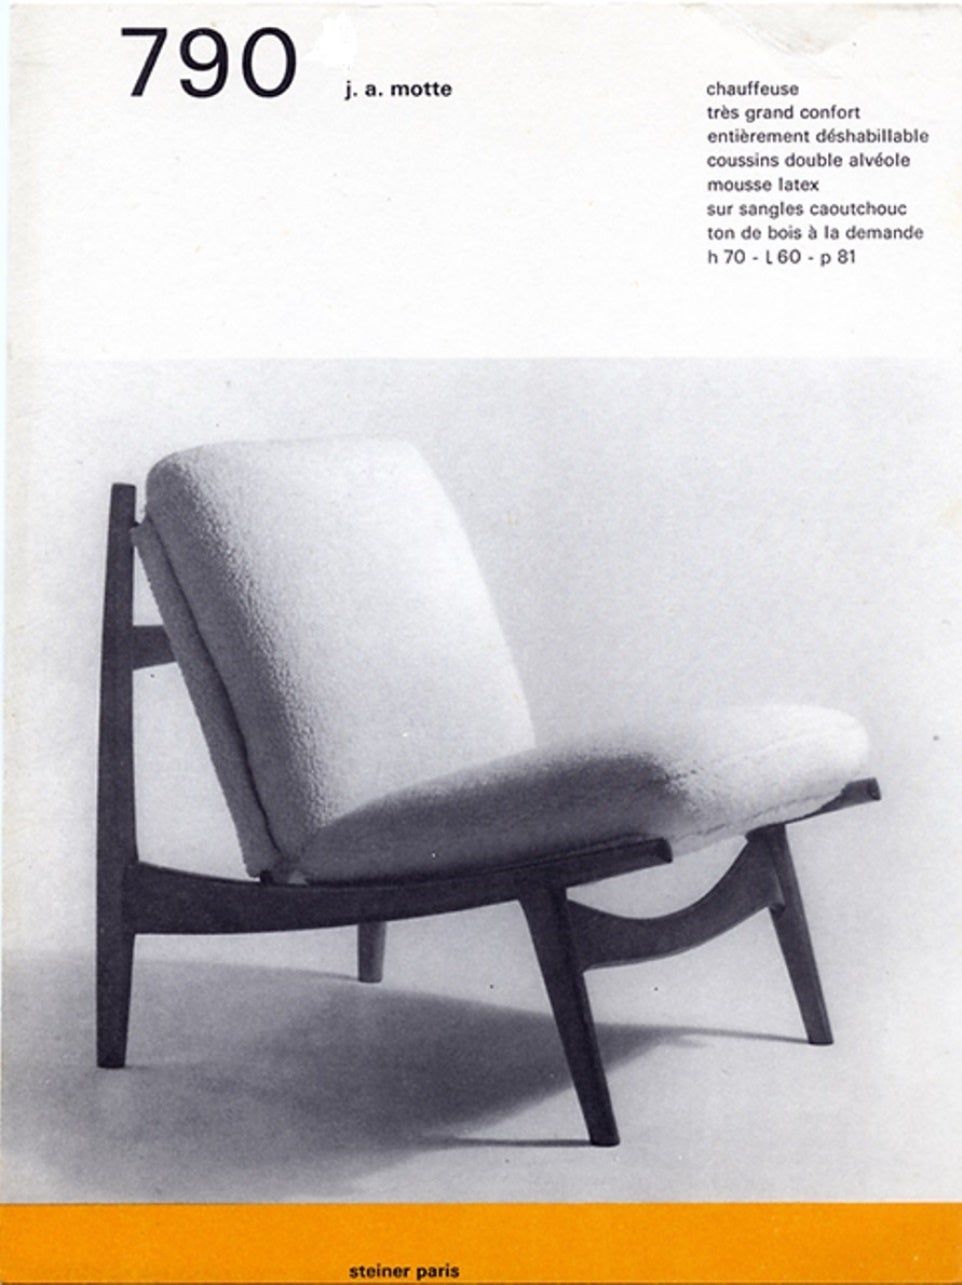 Stunning Organic Form '790' Lounge Chairs by J.A Motte for Steiner, France, 1960 2